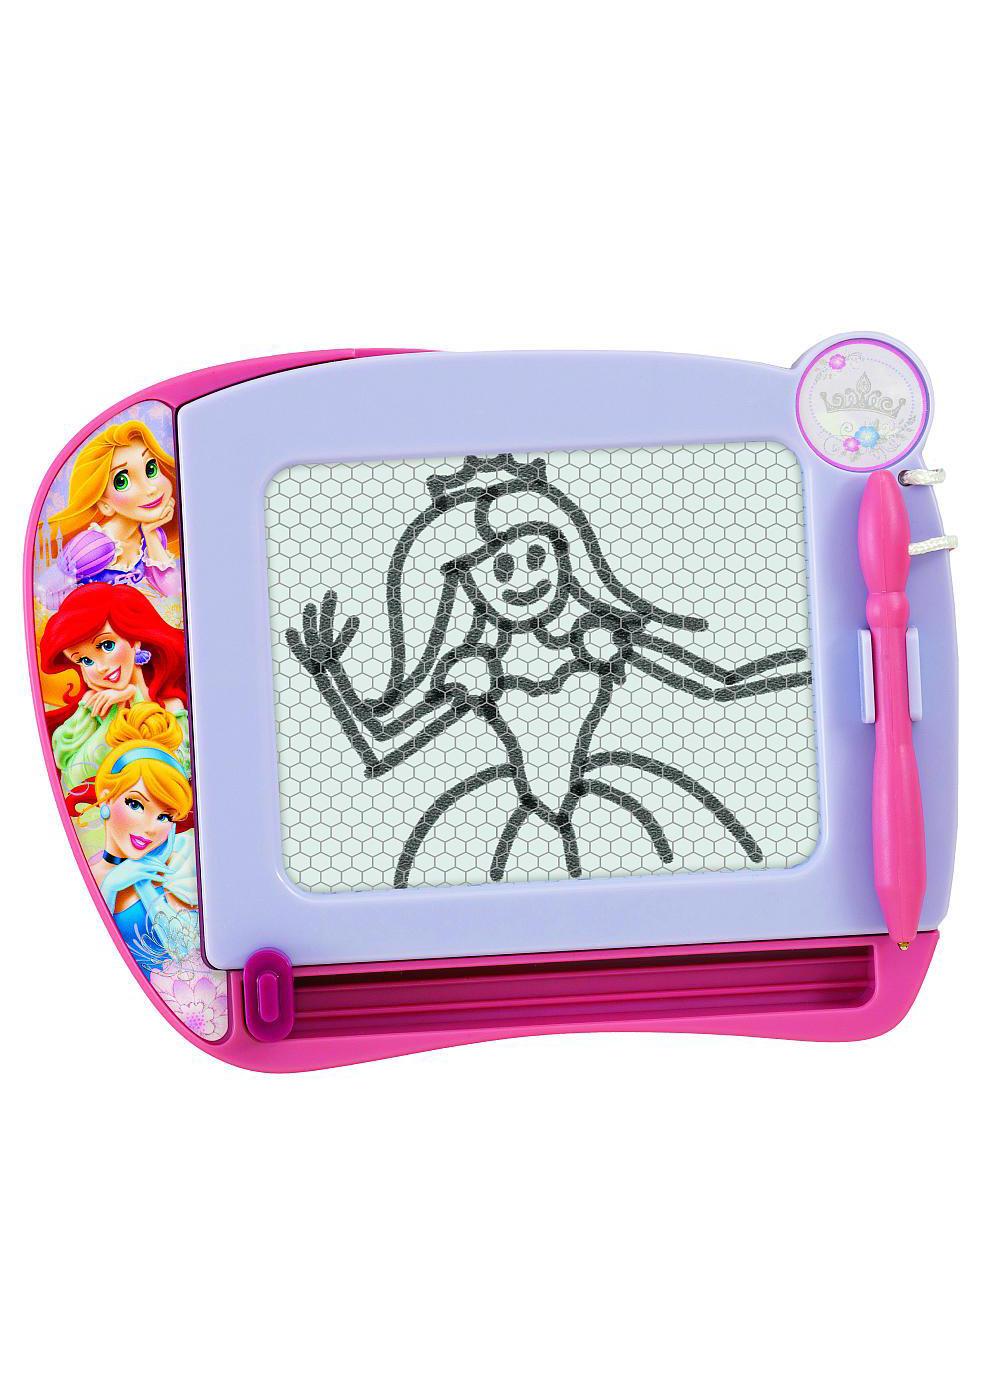  Paladone Toy Box Etch-A-Sketch Sticky Notes : Office Products